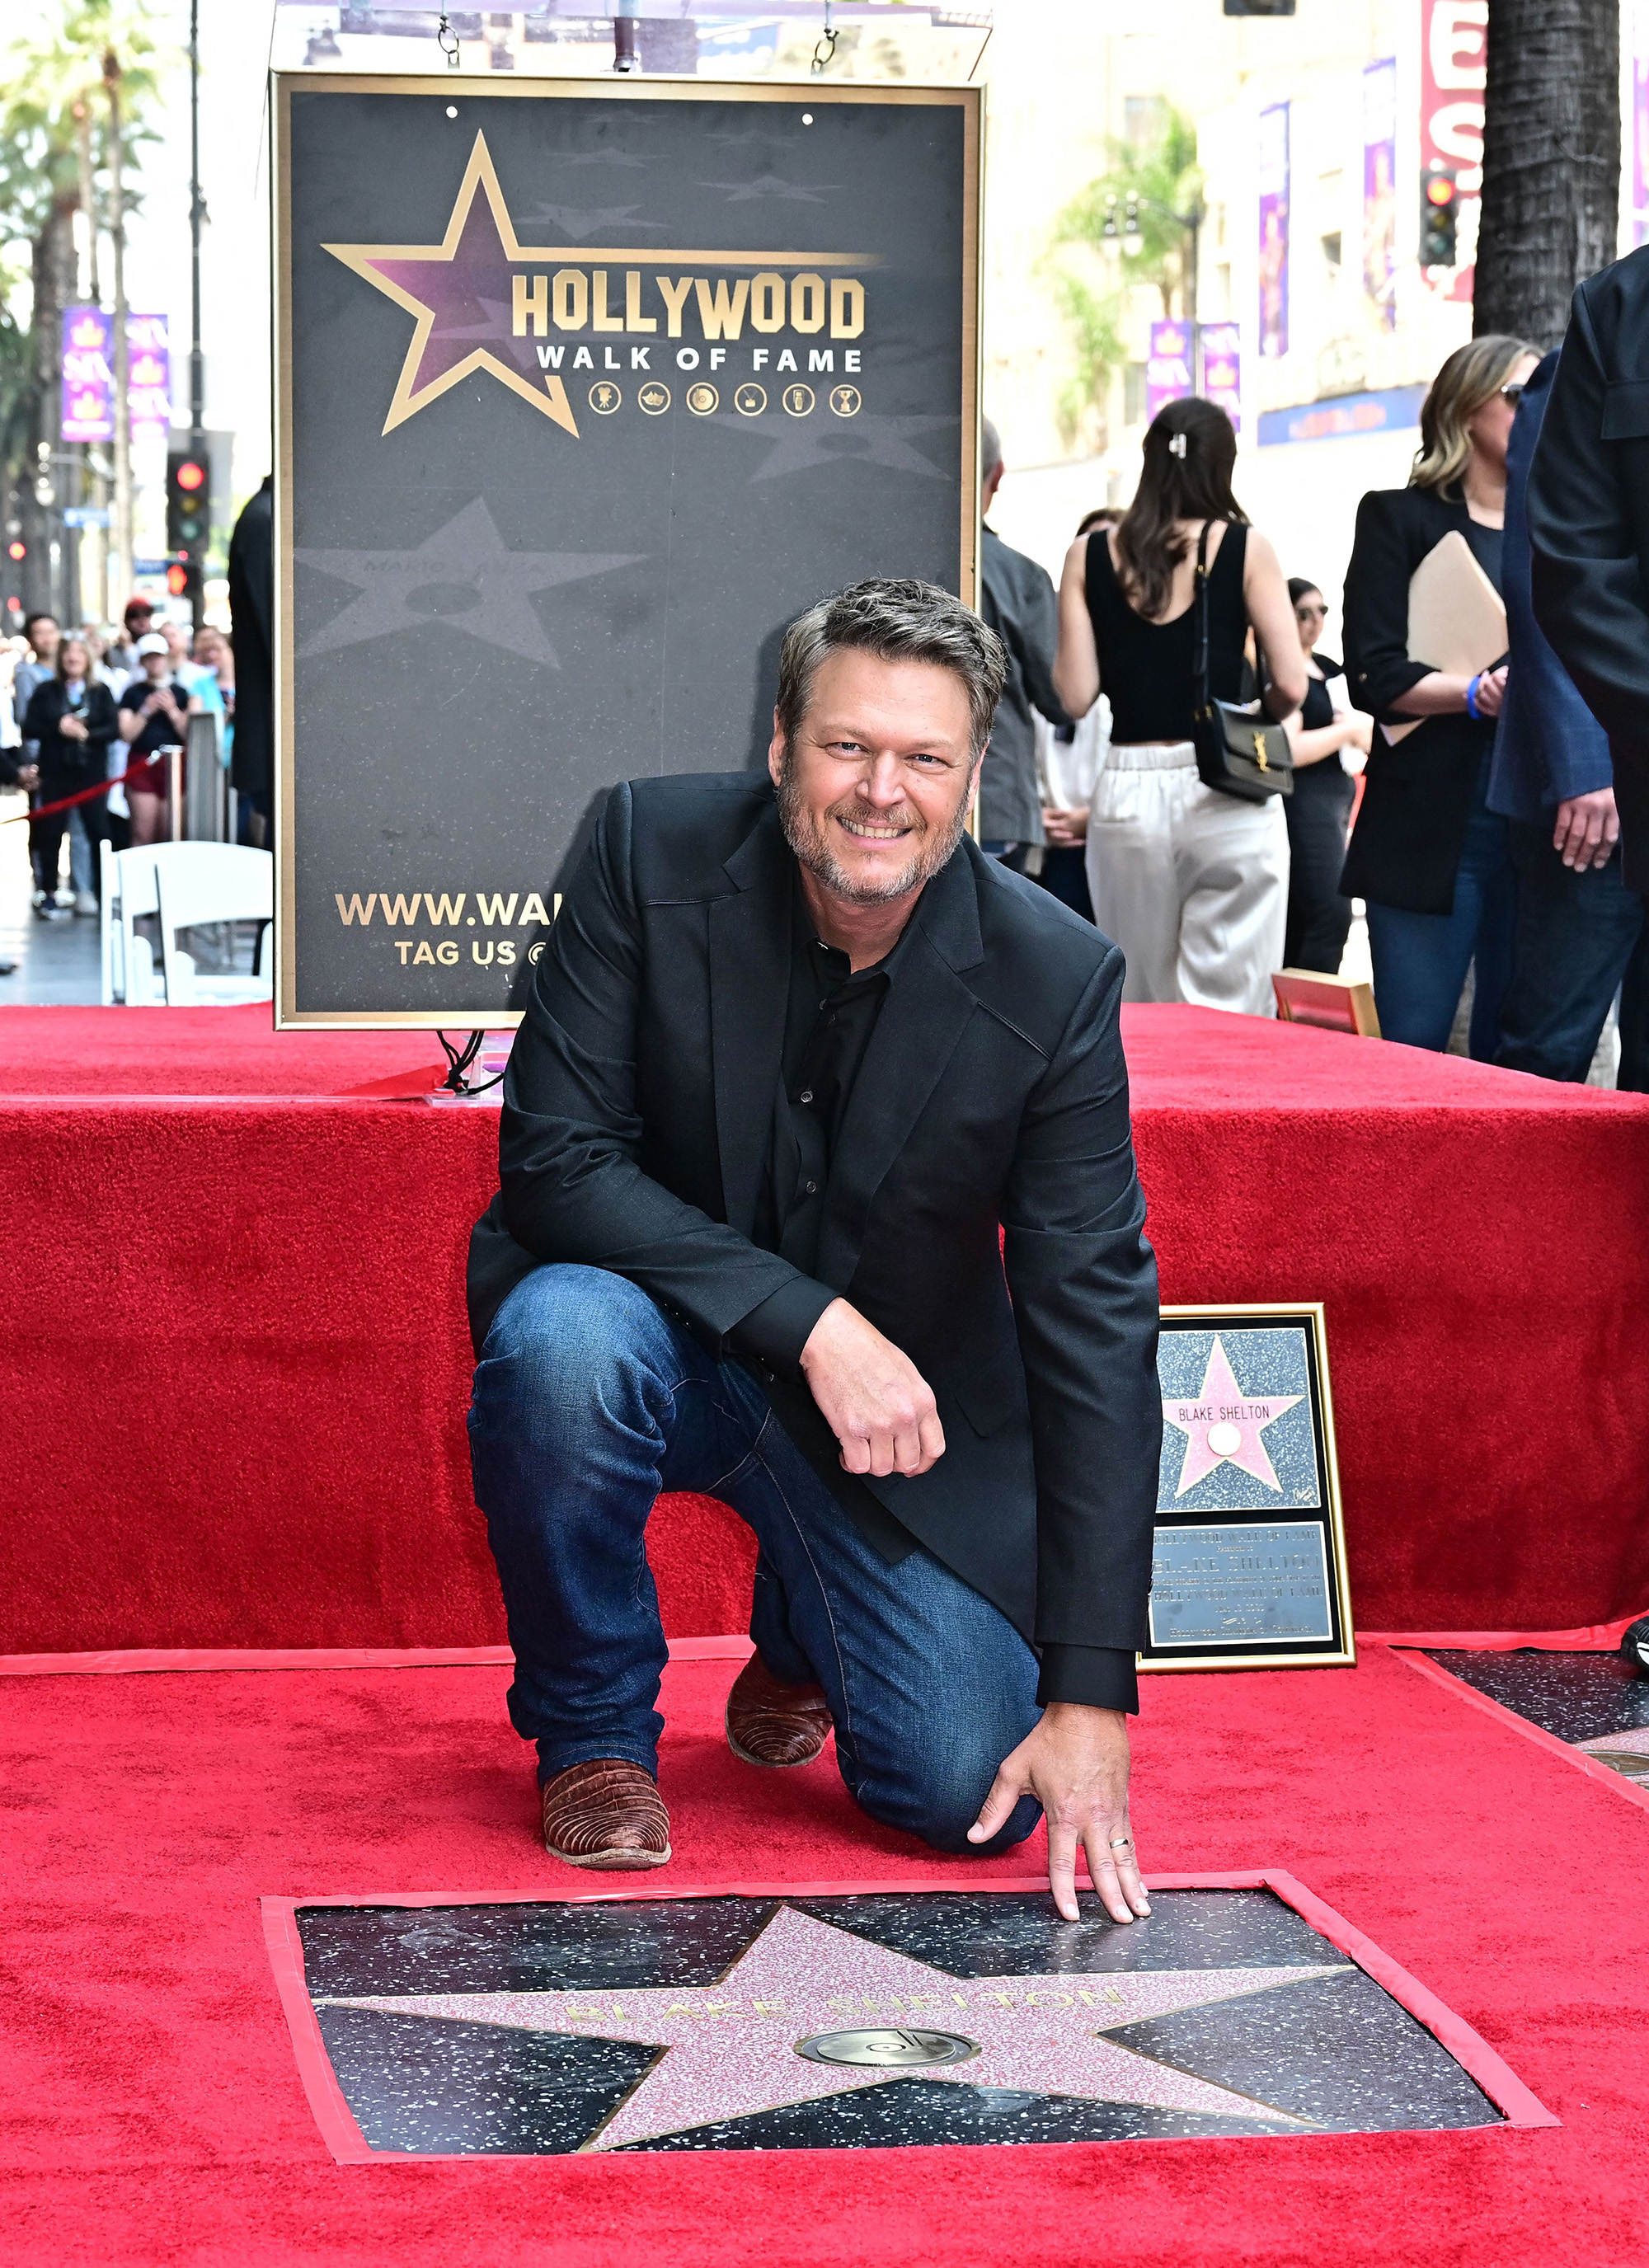 U.S. country singer and television personality Blake Shelton poses during his Hollywood Walk of Fame Star ceremony in Hollywood, Calif. on May 12, 2023.